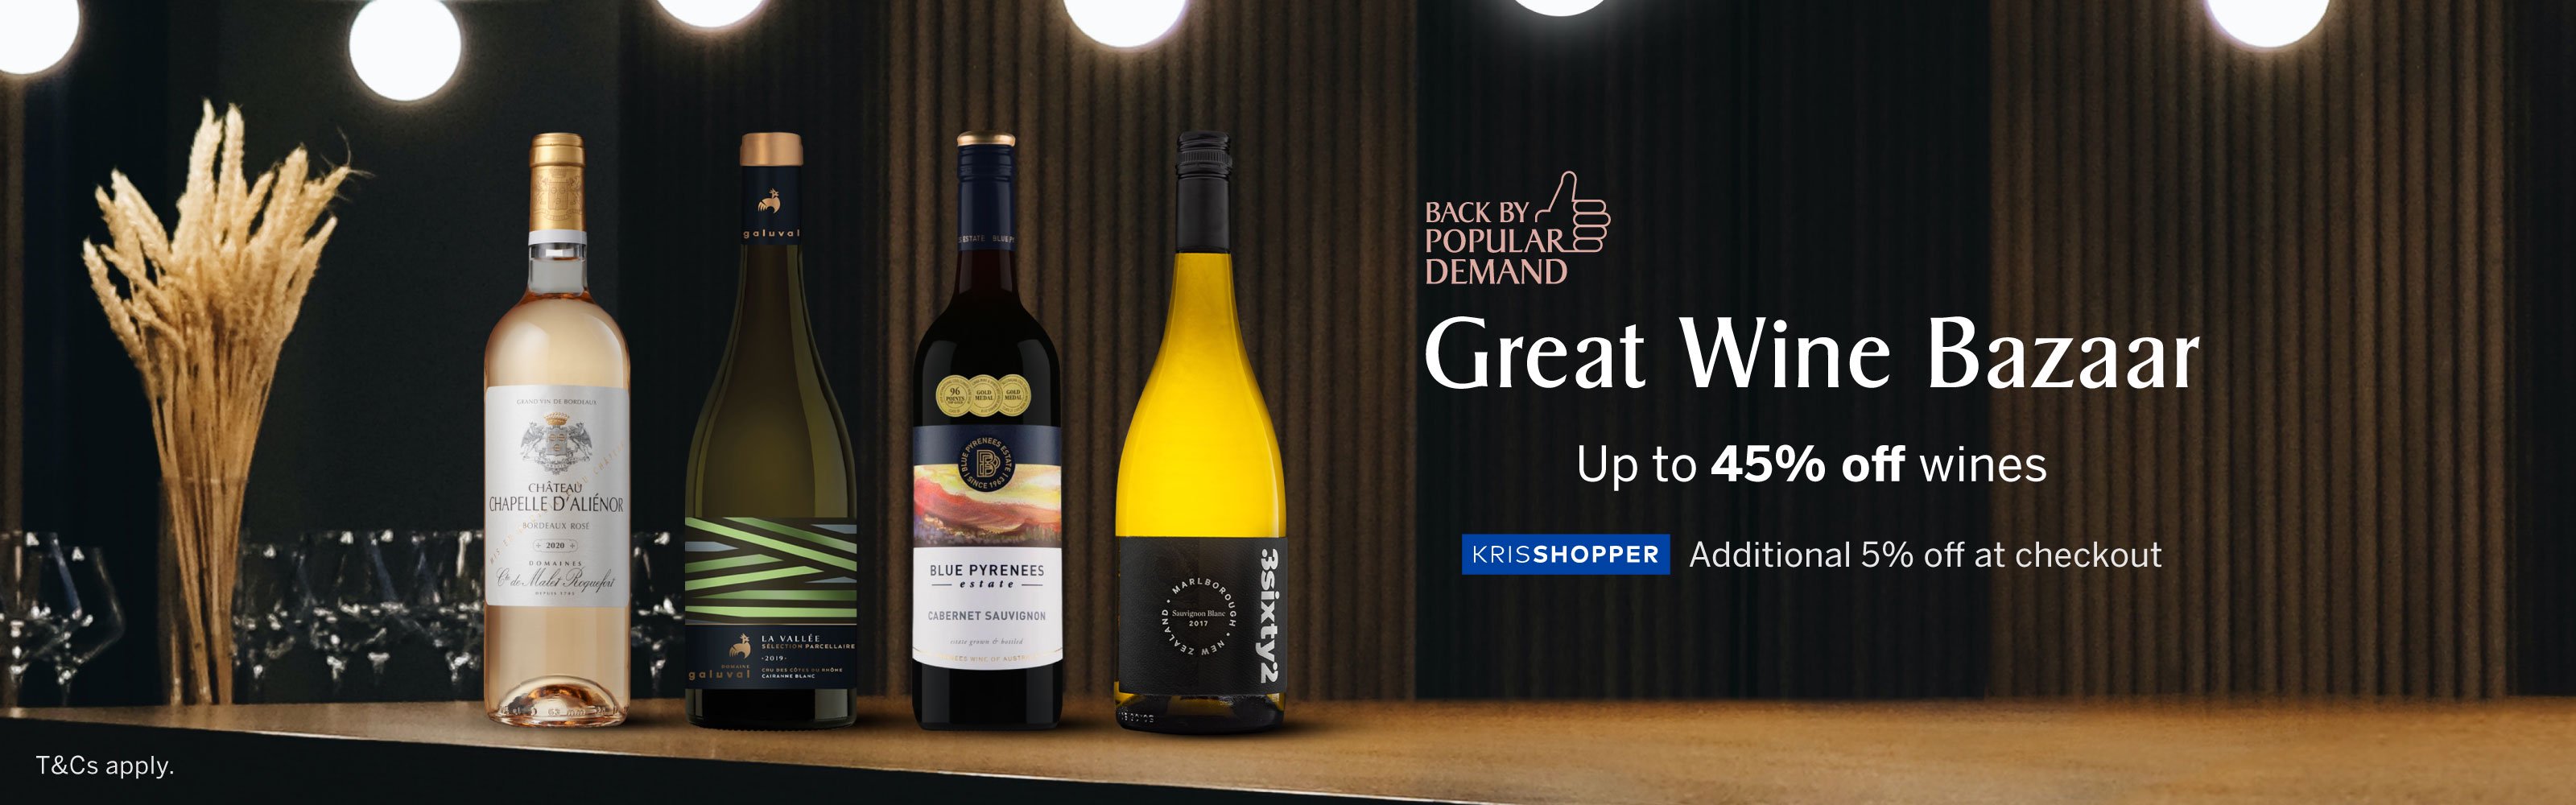 Great Wine Bazaar - Up to 45% off wines + extra 5% off at checkout